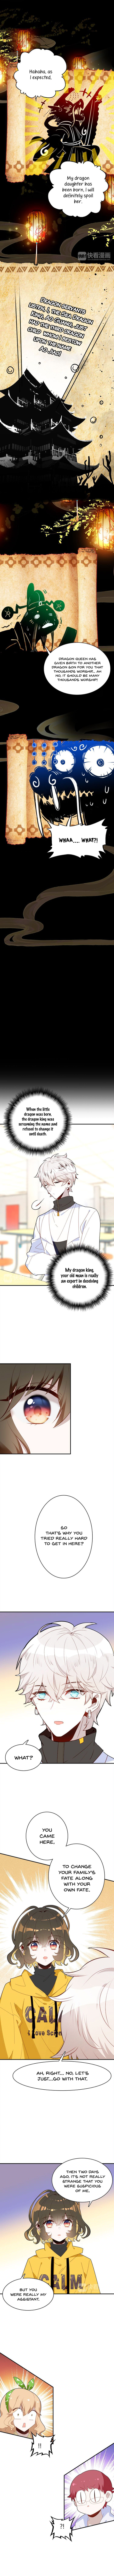 You Are My Lovely Dragon King Ch. 7 A "beautiful" error